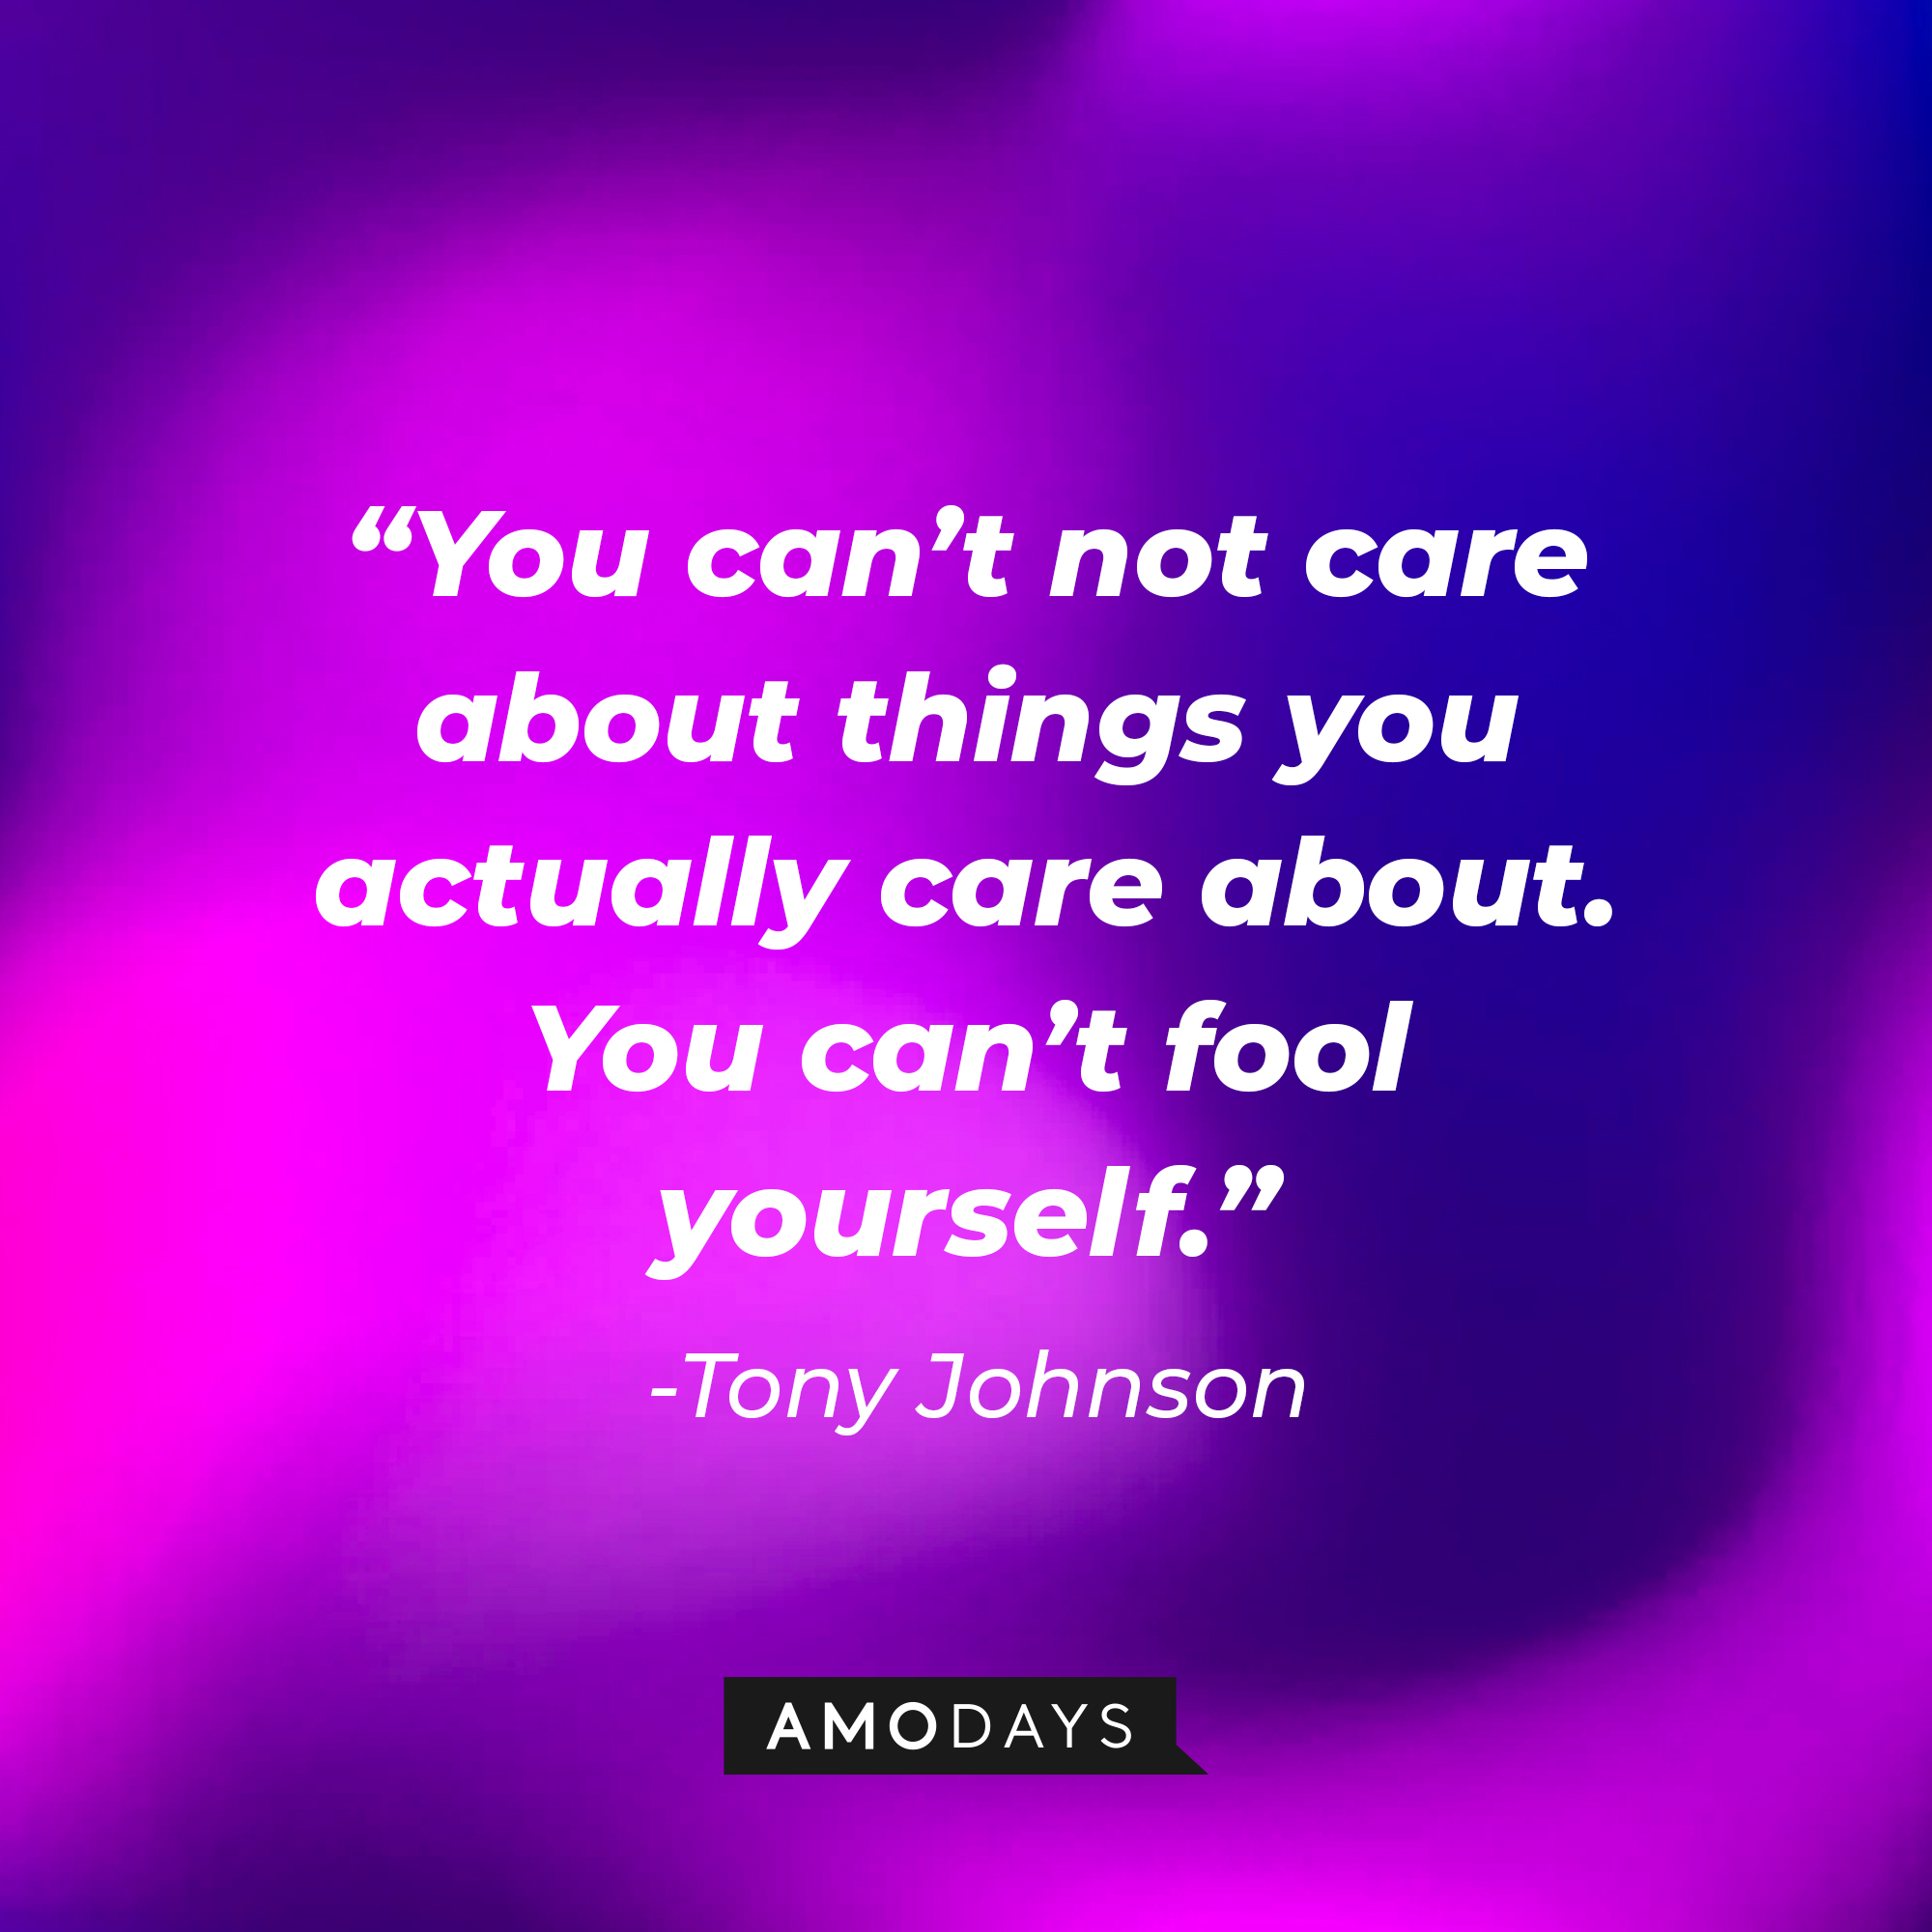 Tony Johnson’s quote:  “You can’t not care about things you actually care about. You can’t fool yourself.”  |  Source: AmoDays